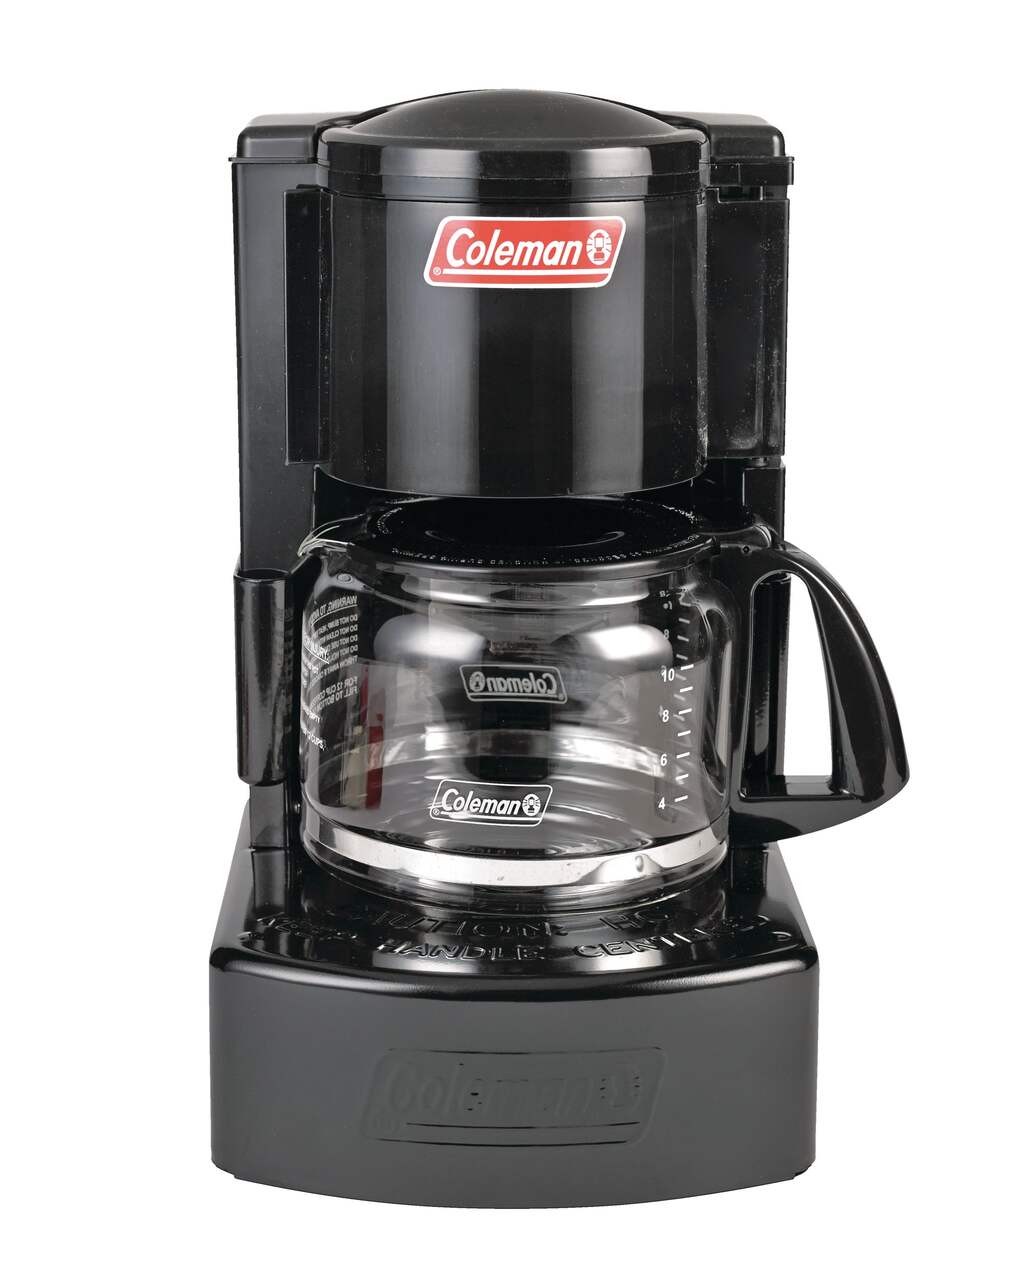 https://media-www.canadiantire.ca/product/playing/camping/camping-living/0762627/coleman-coffee-maker-a3c8e24a-8782-4ff1-8b79-1d5594d1a913-jpgrendition.jpg?imdensity=1&imwidth=640&impolicy=mZoom